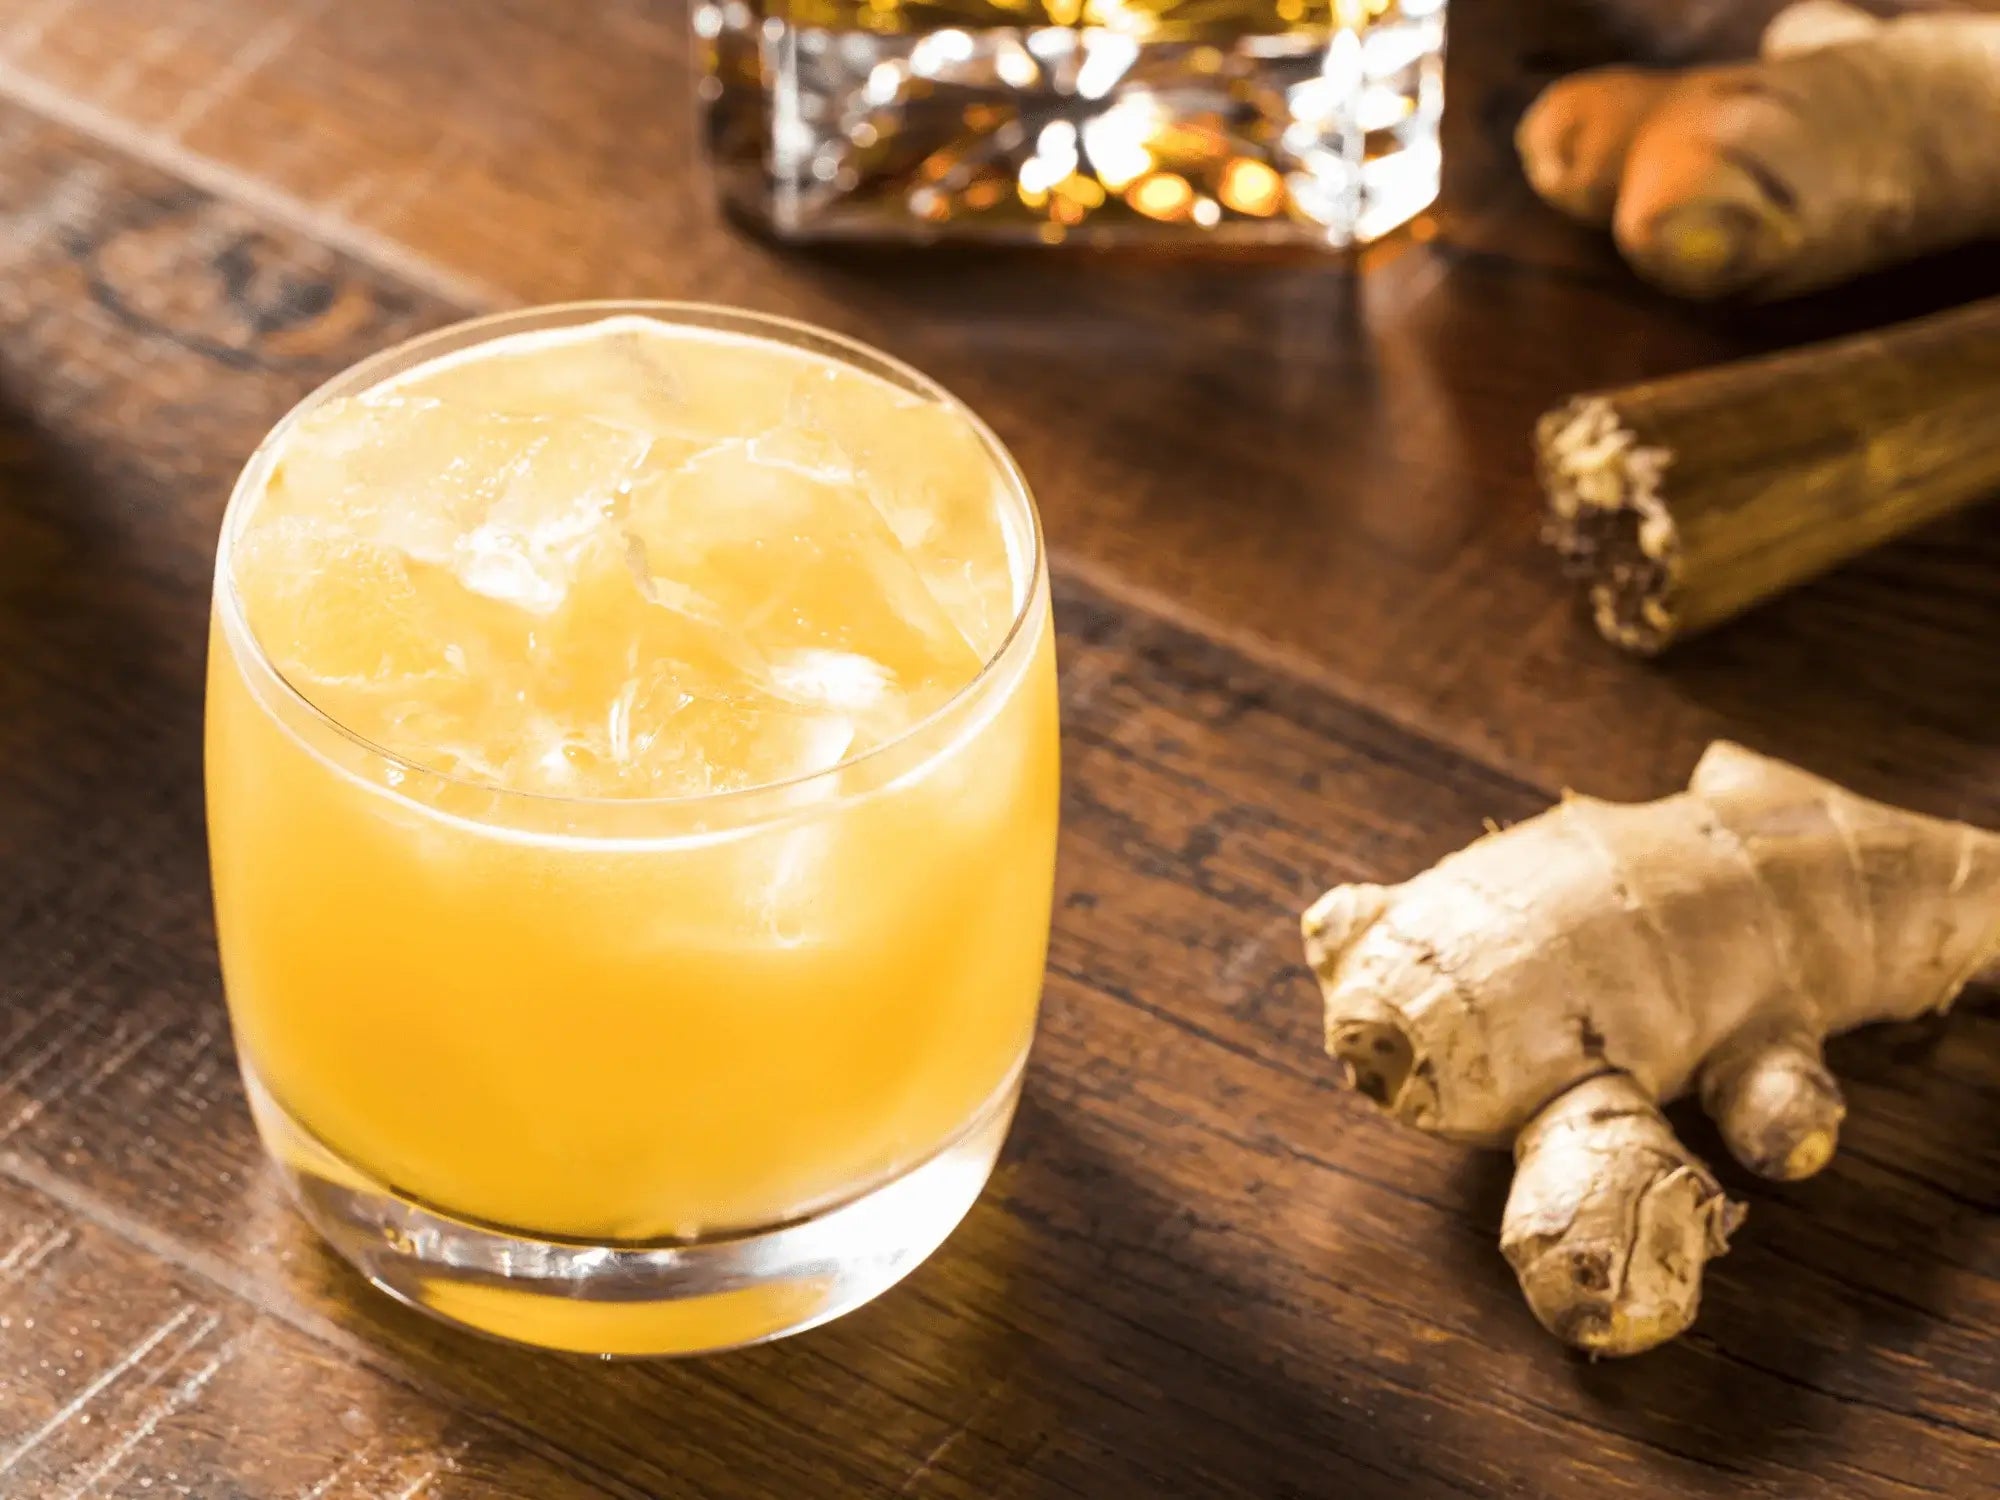 Penicillin Mocktail with ginger and cinnamon on the bench